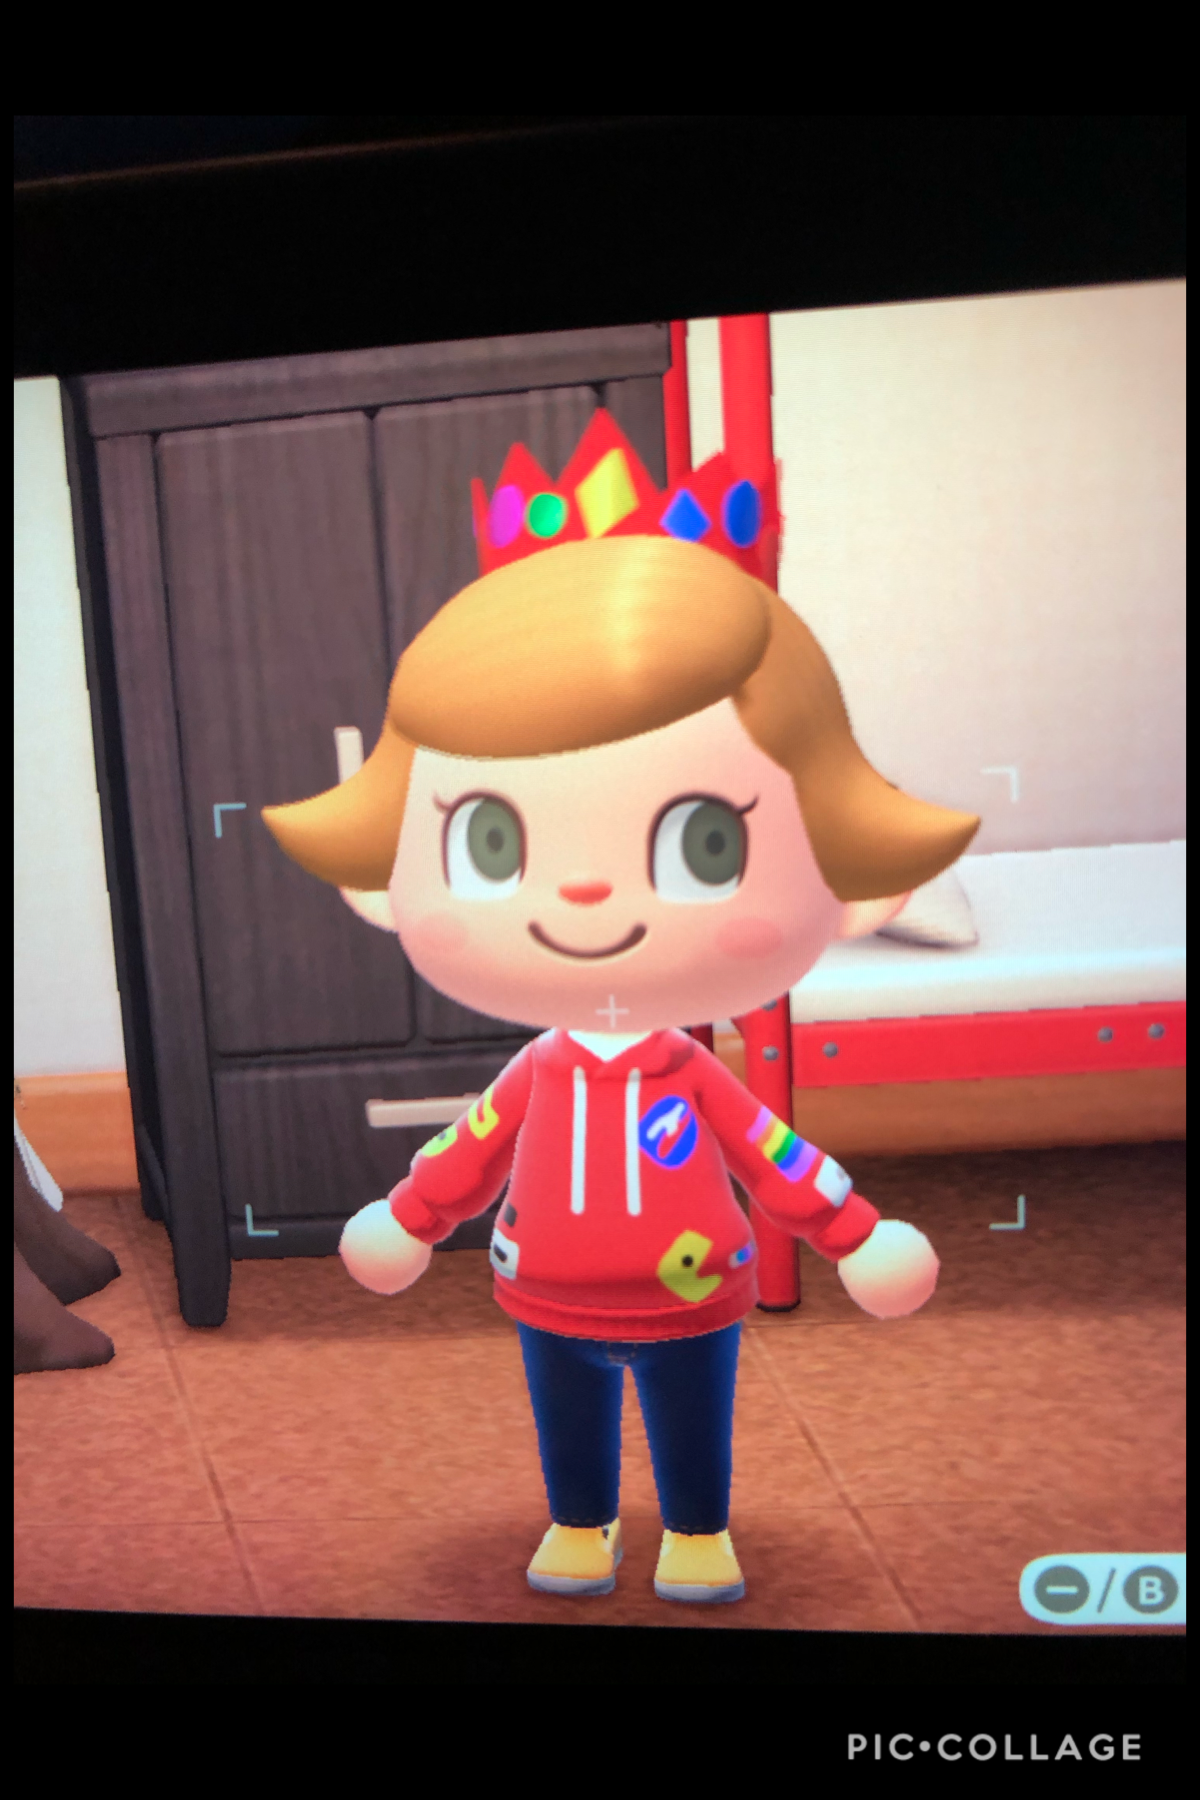 I also made Michael Mell’s Hoodie in animal crossing:) 